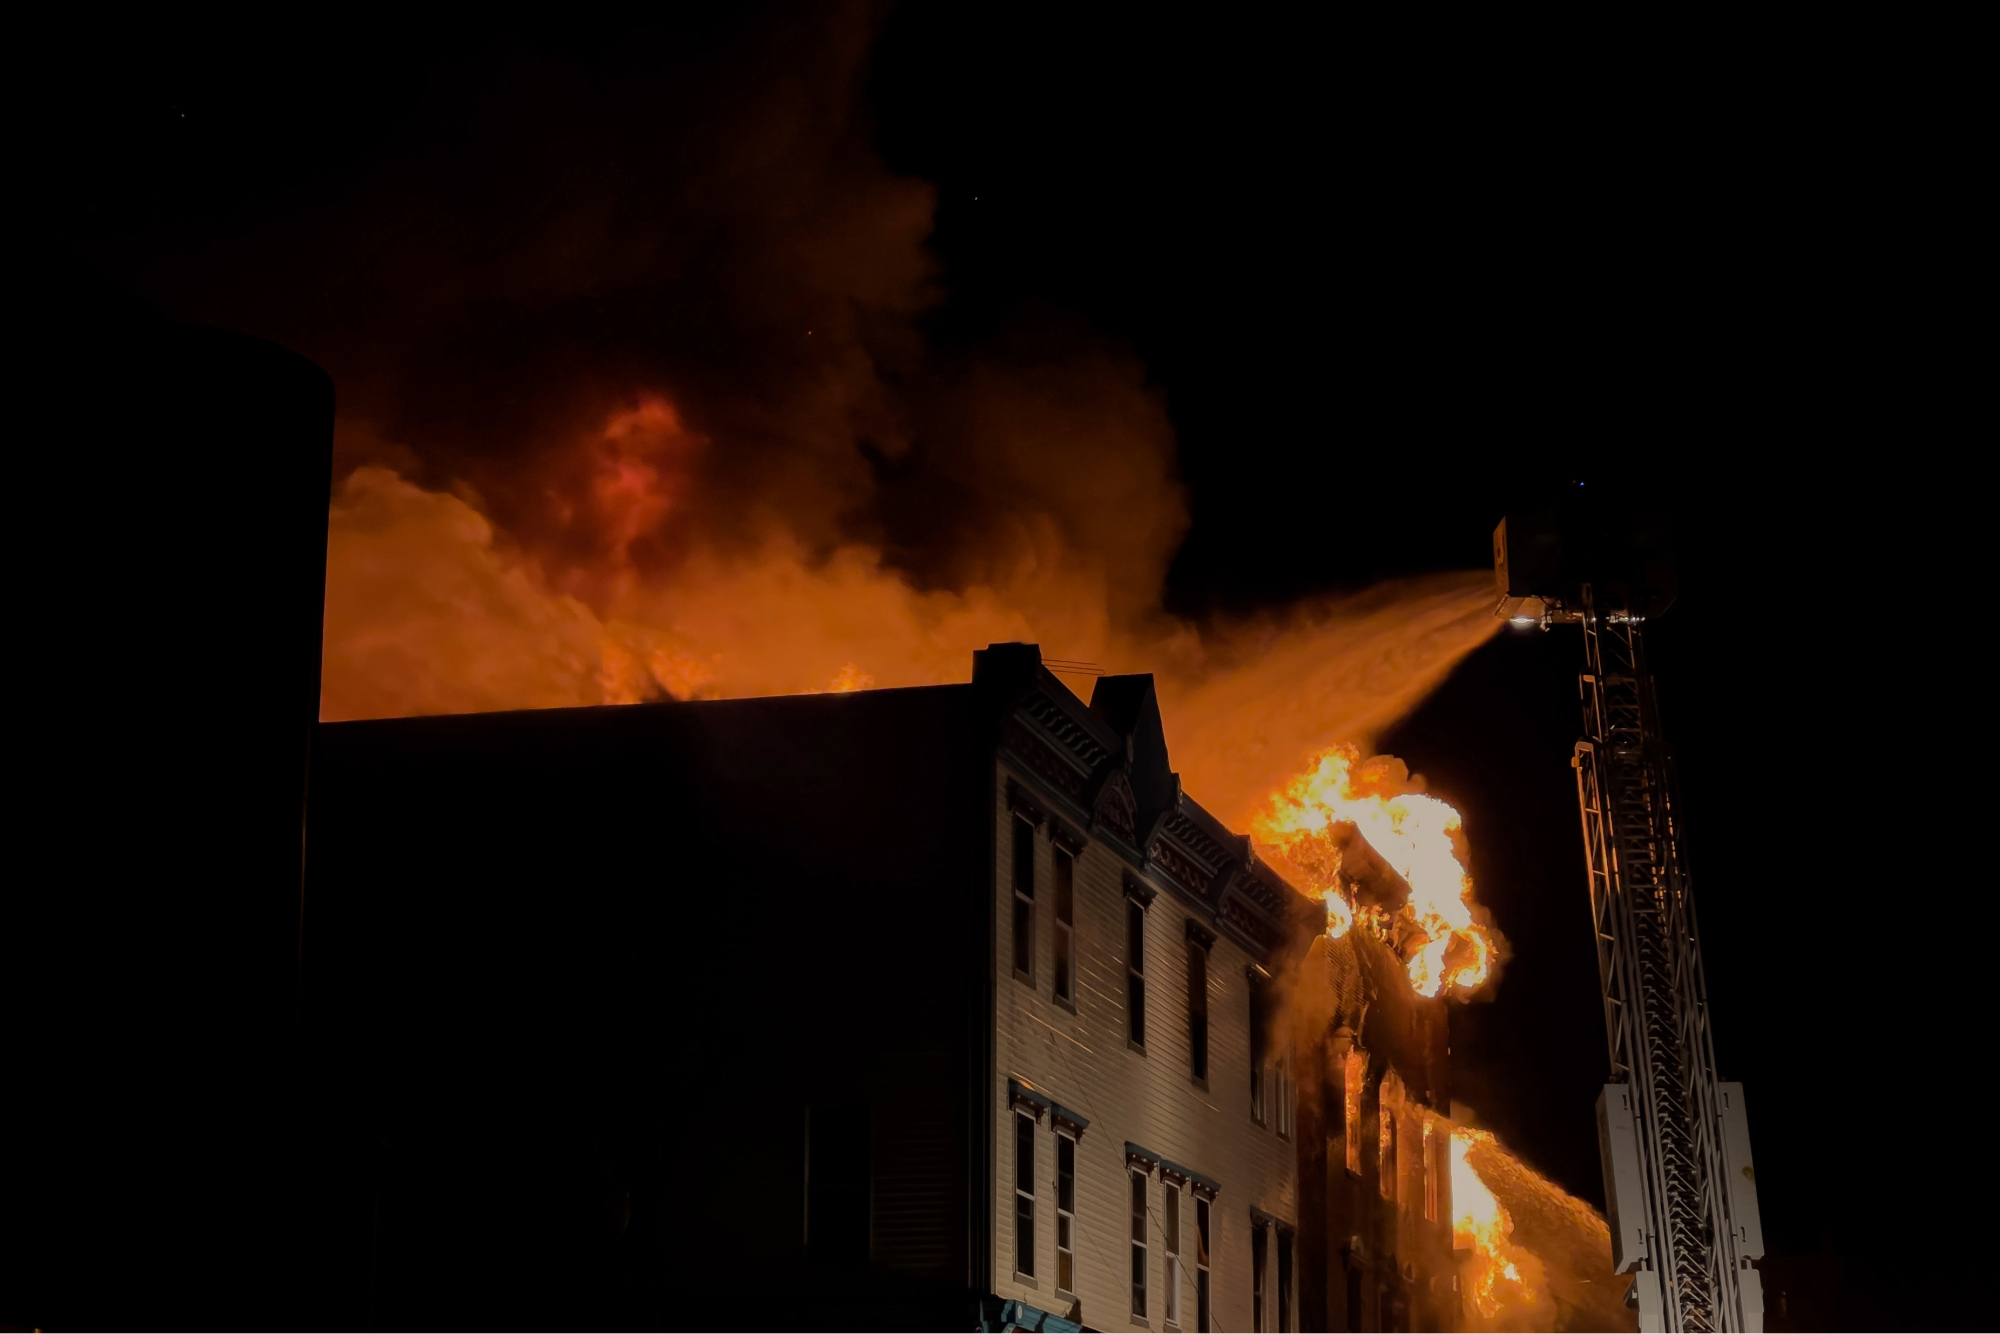 Cost of Fire to Business - The Effects of Closing | Coopers Fire